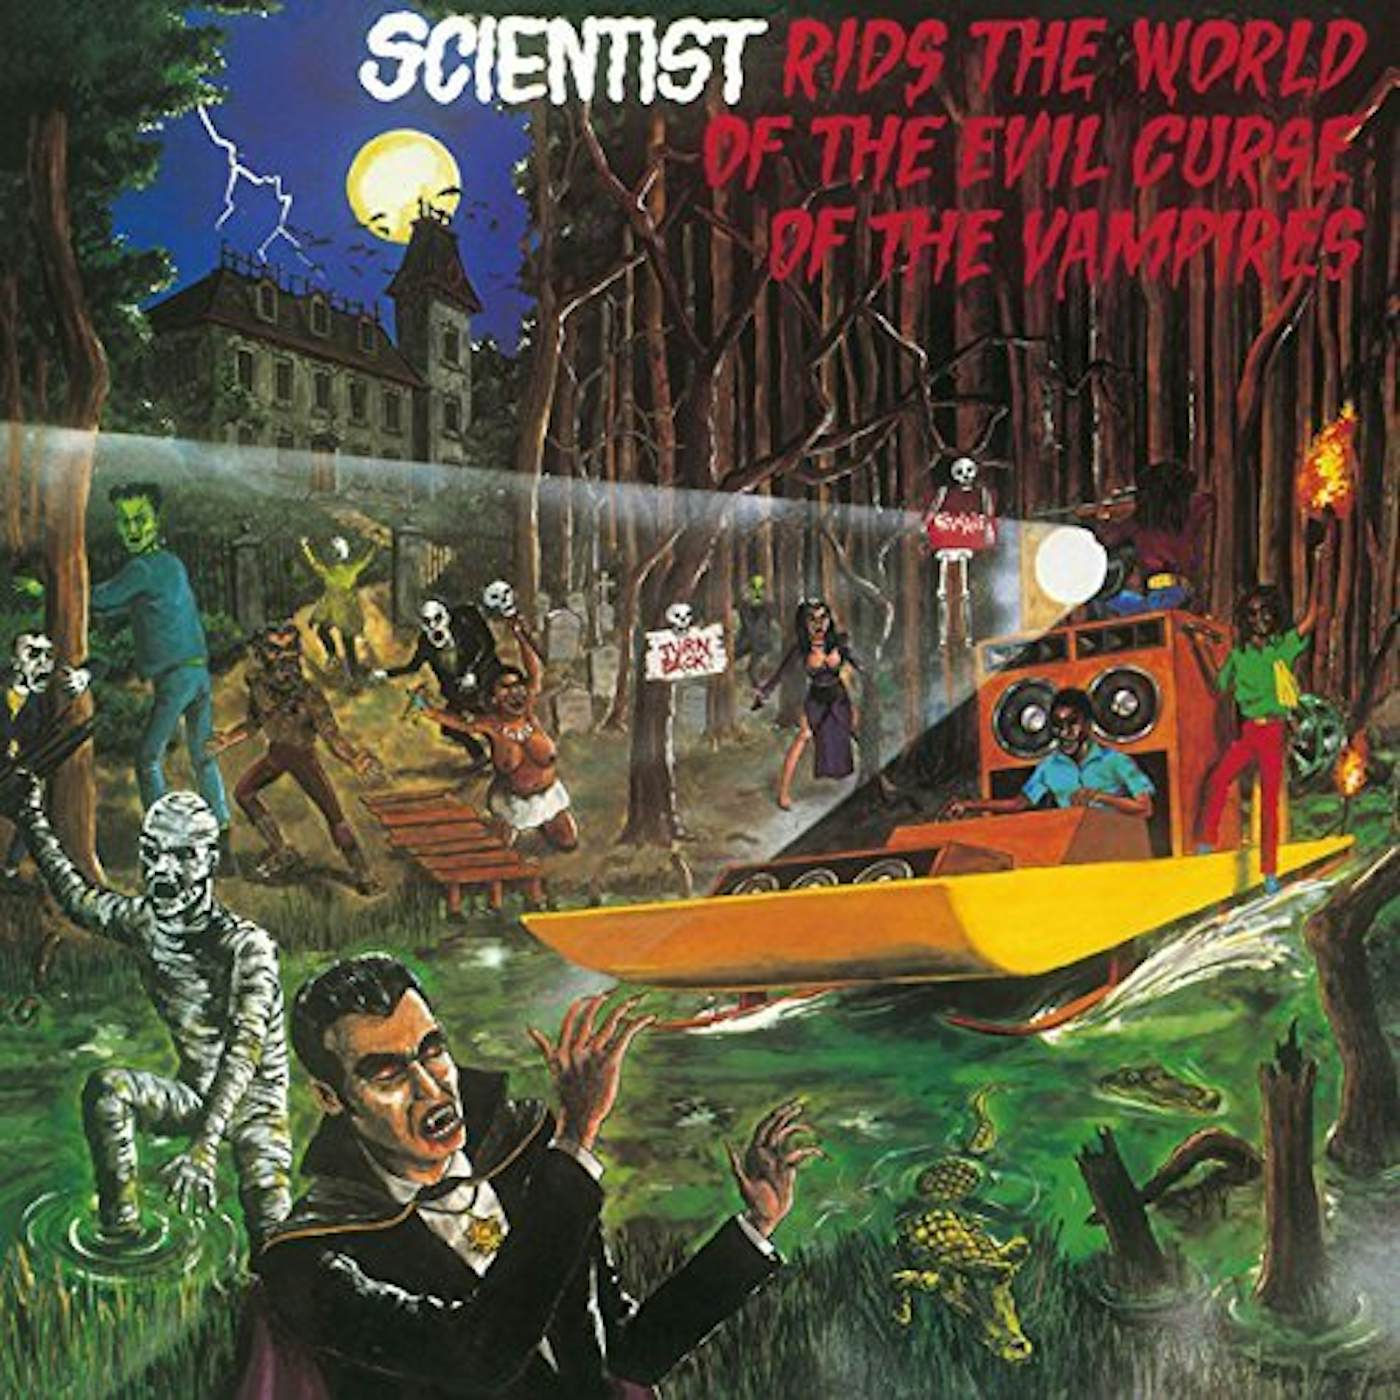 Scientist RIDS THE WORLD OF THE EVIL CURSE OF THE VAMPIRES Vinyl Record